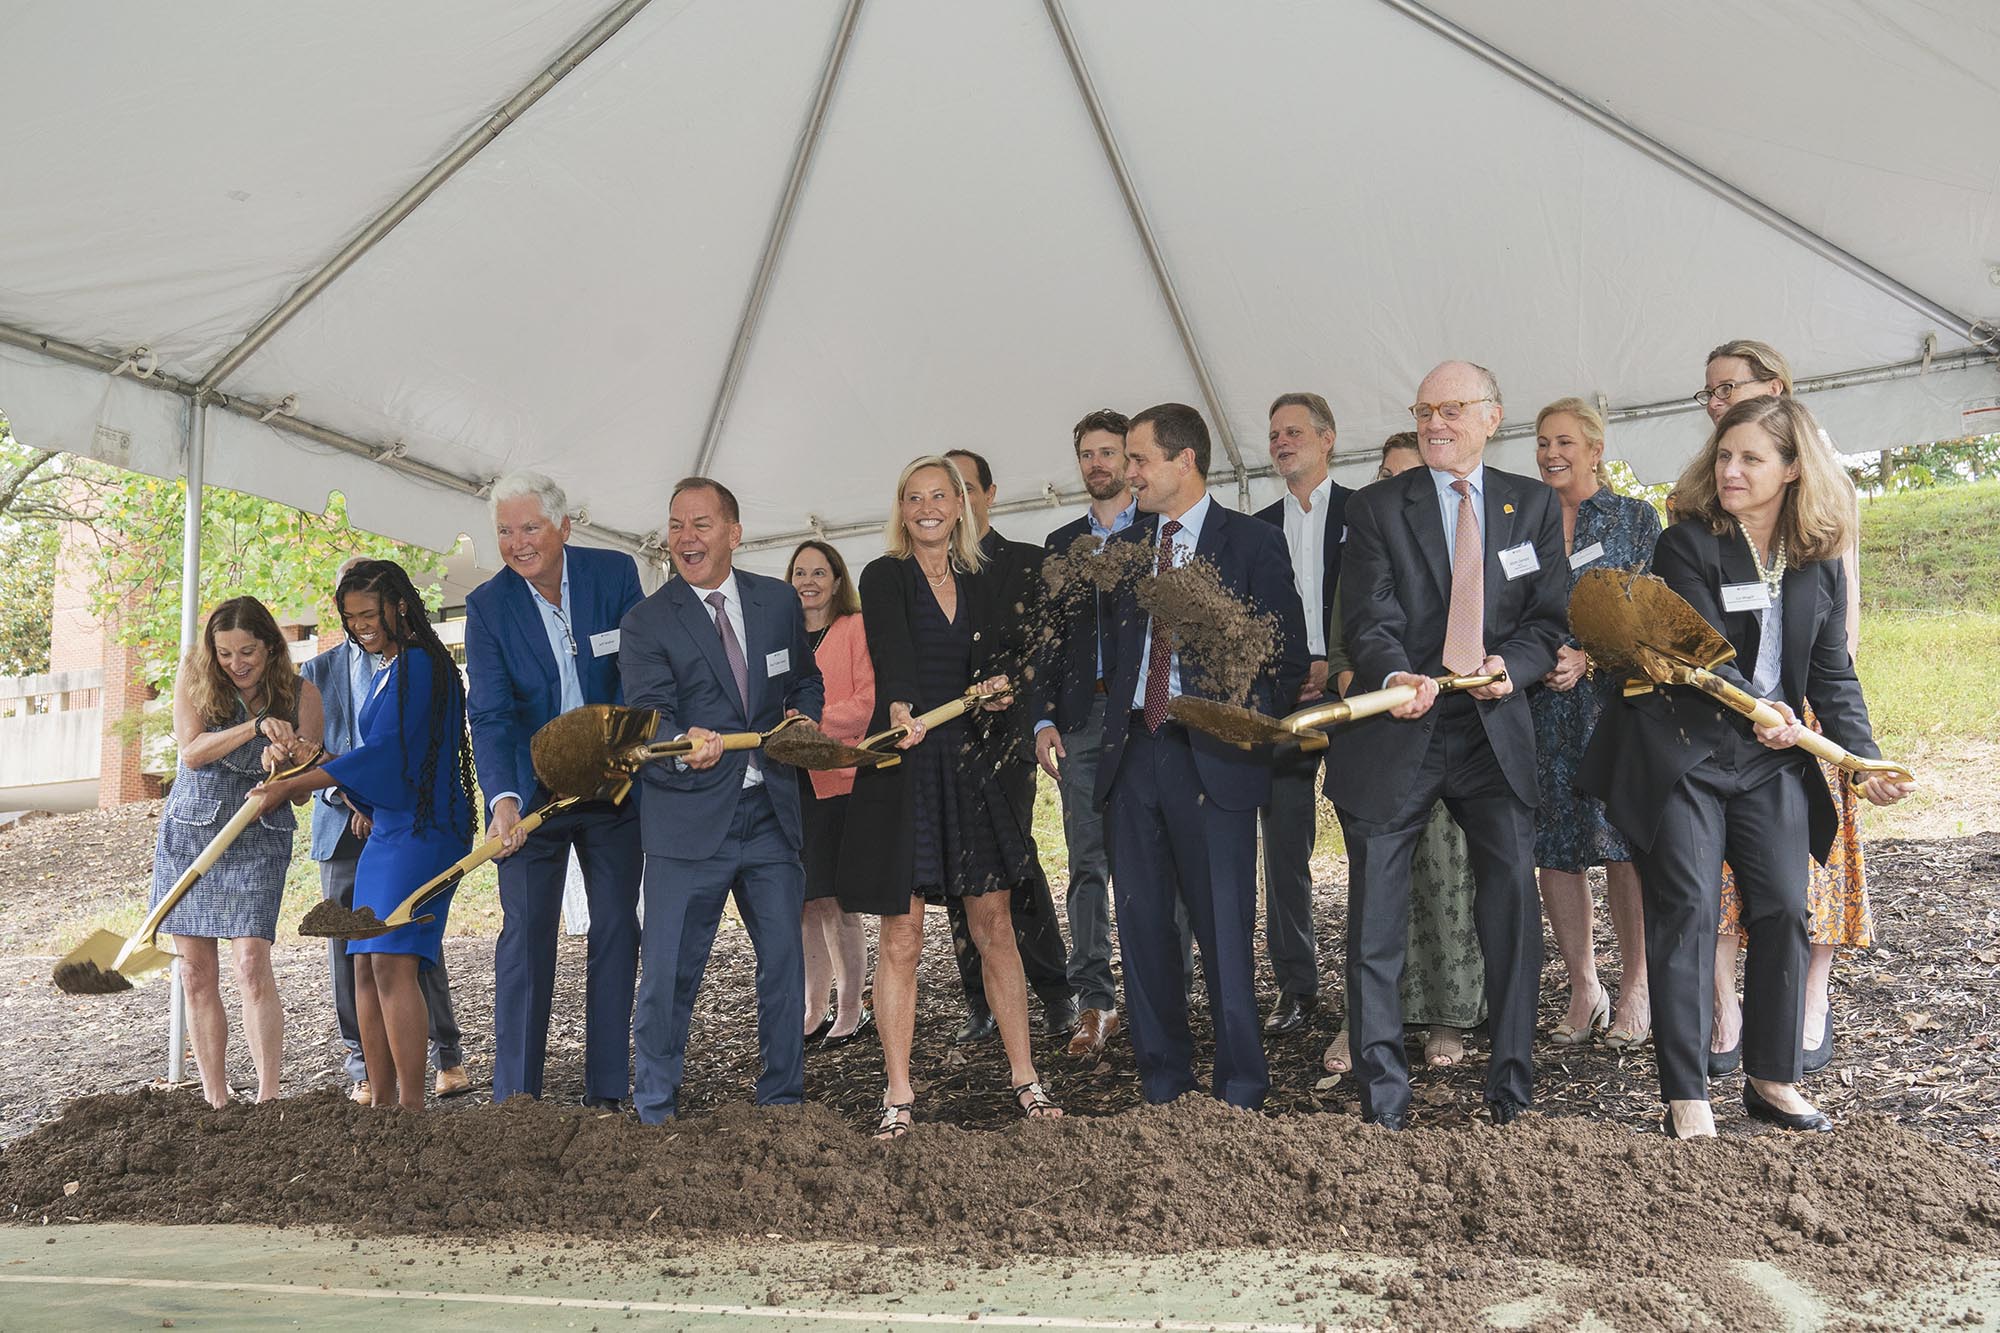 UVA leaders breaking ground for the new Contemplative Center Building